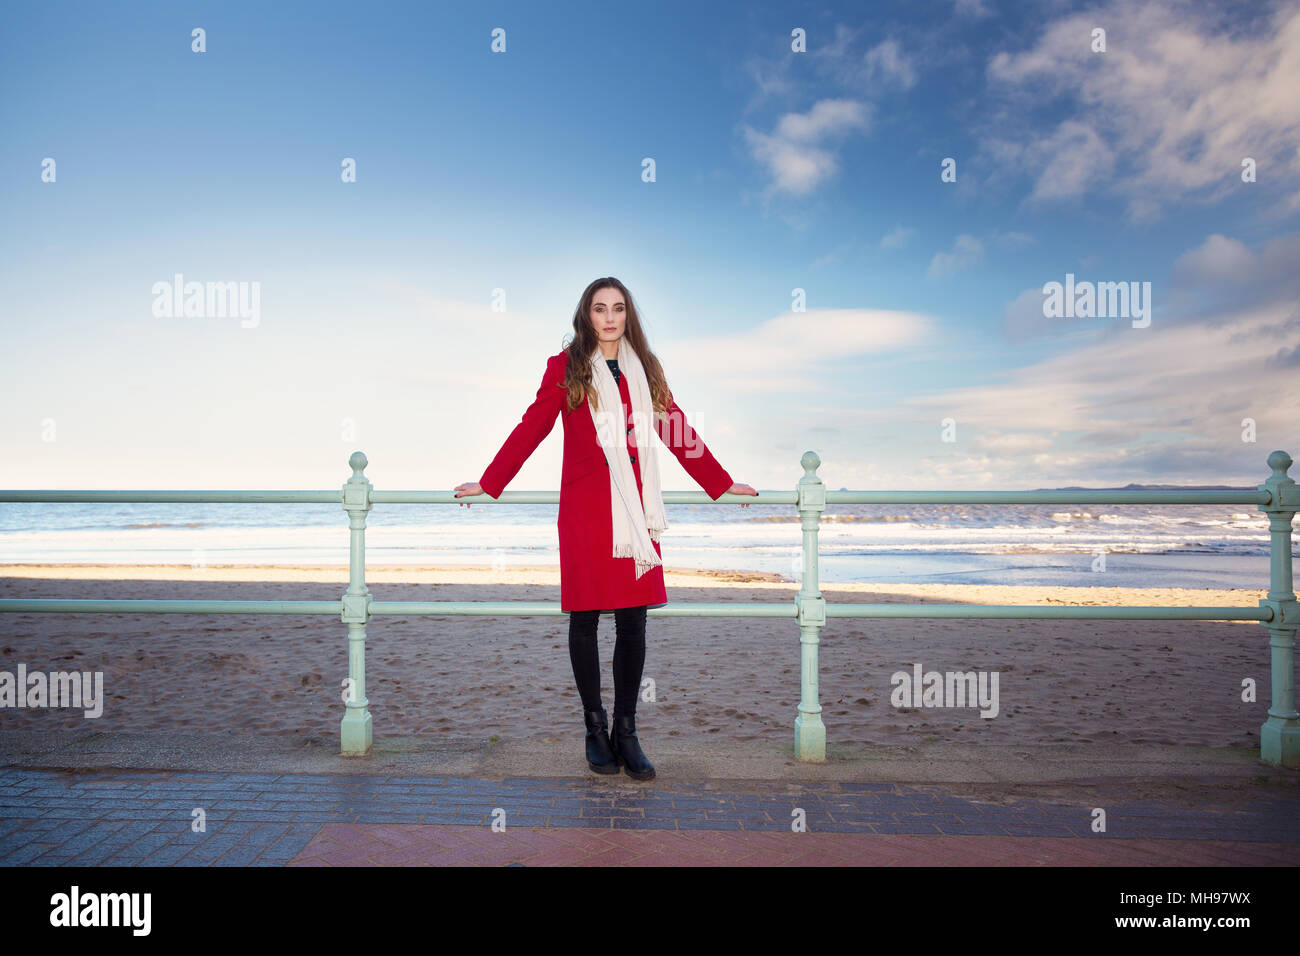 Woman at the beach, showing emotion and expression dealing with anxiety, grief, depression and mental health. Stock Photo